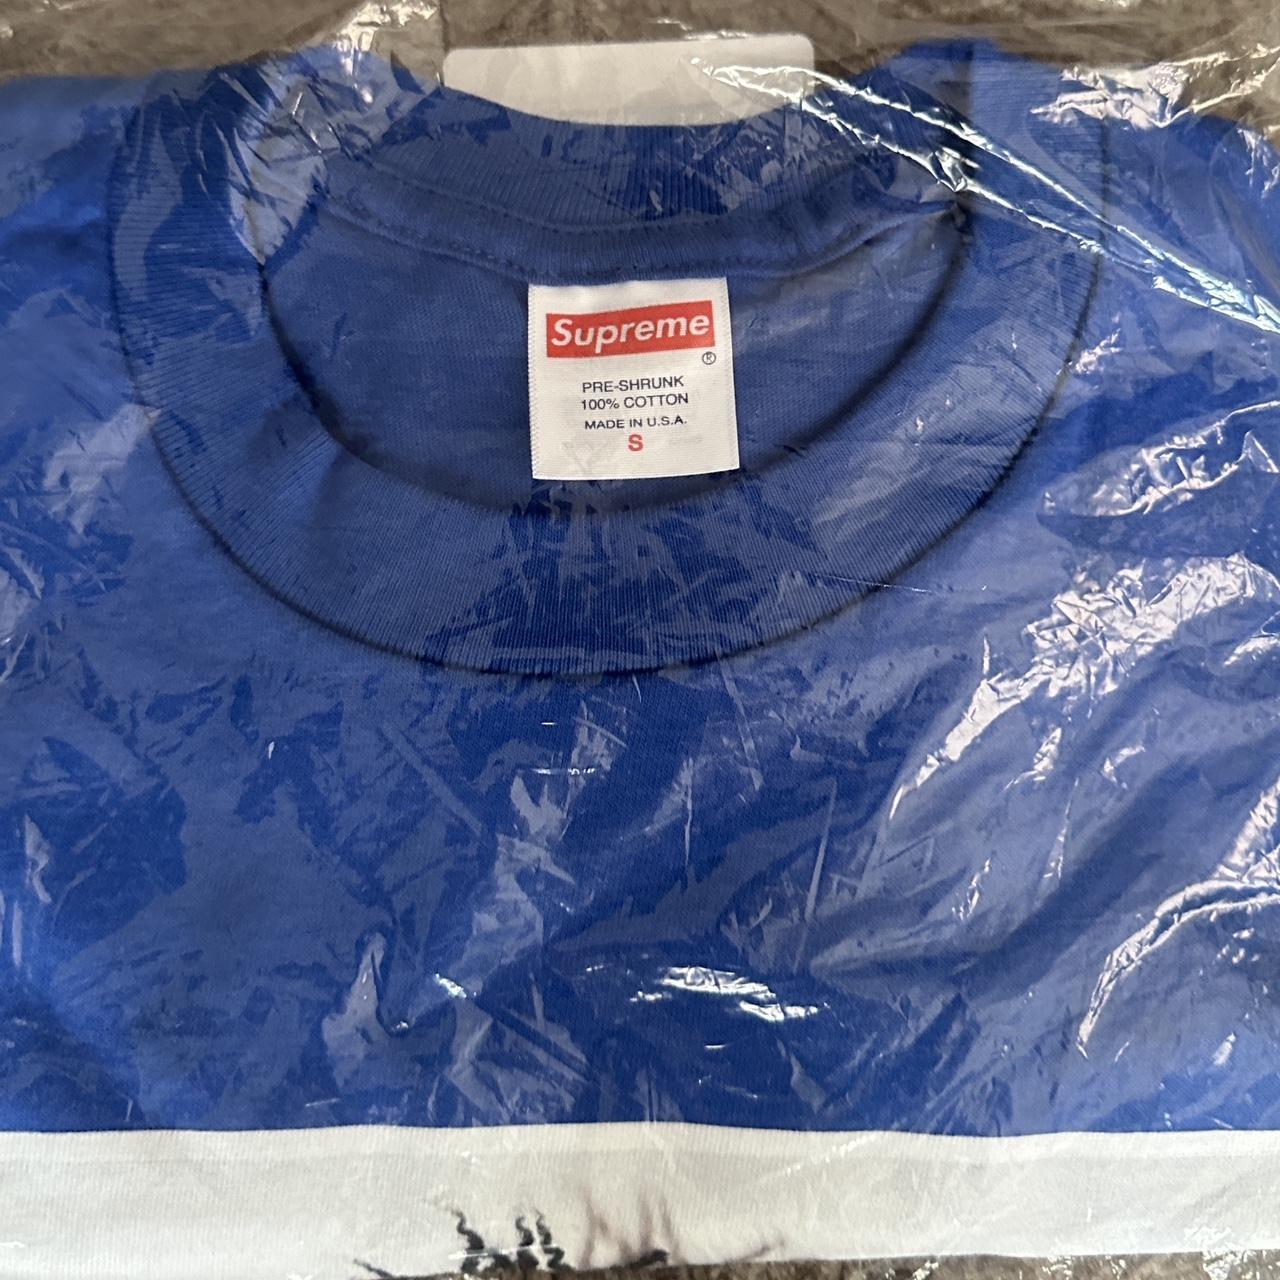 Supreme nba youngboy tee in hand Size L - Depop